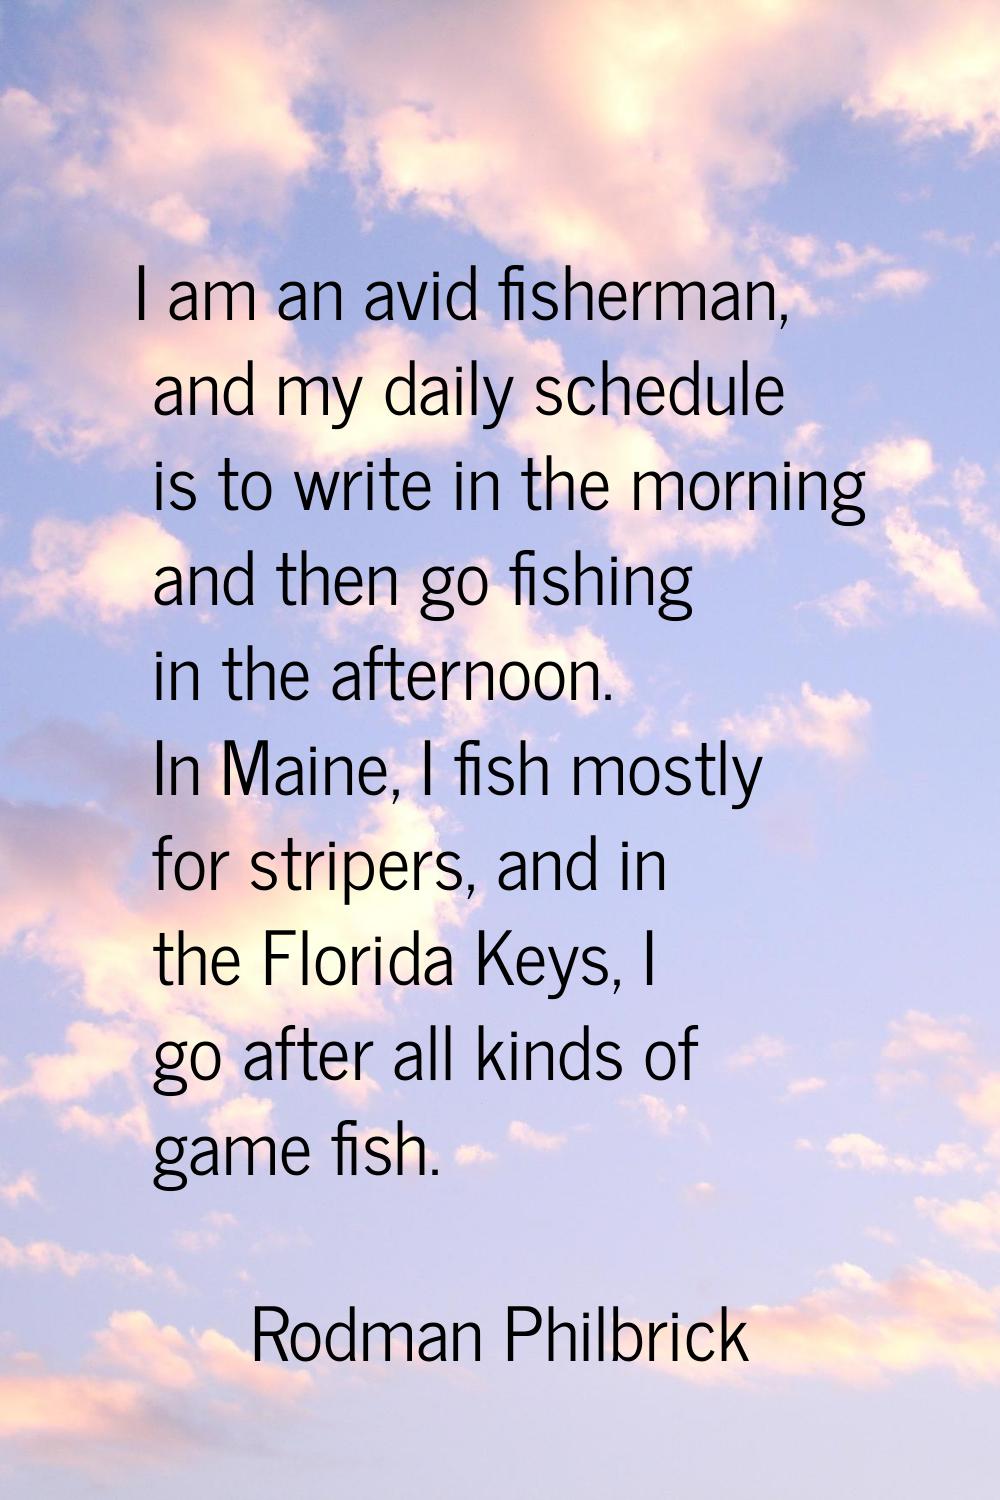 I am an avid fisherman, and my daily schedule is to write in the morning and then go fishing in the